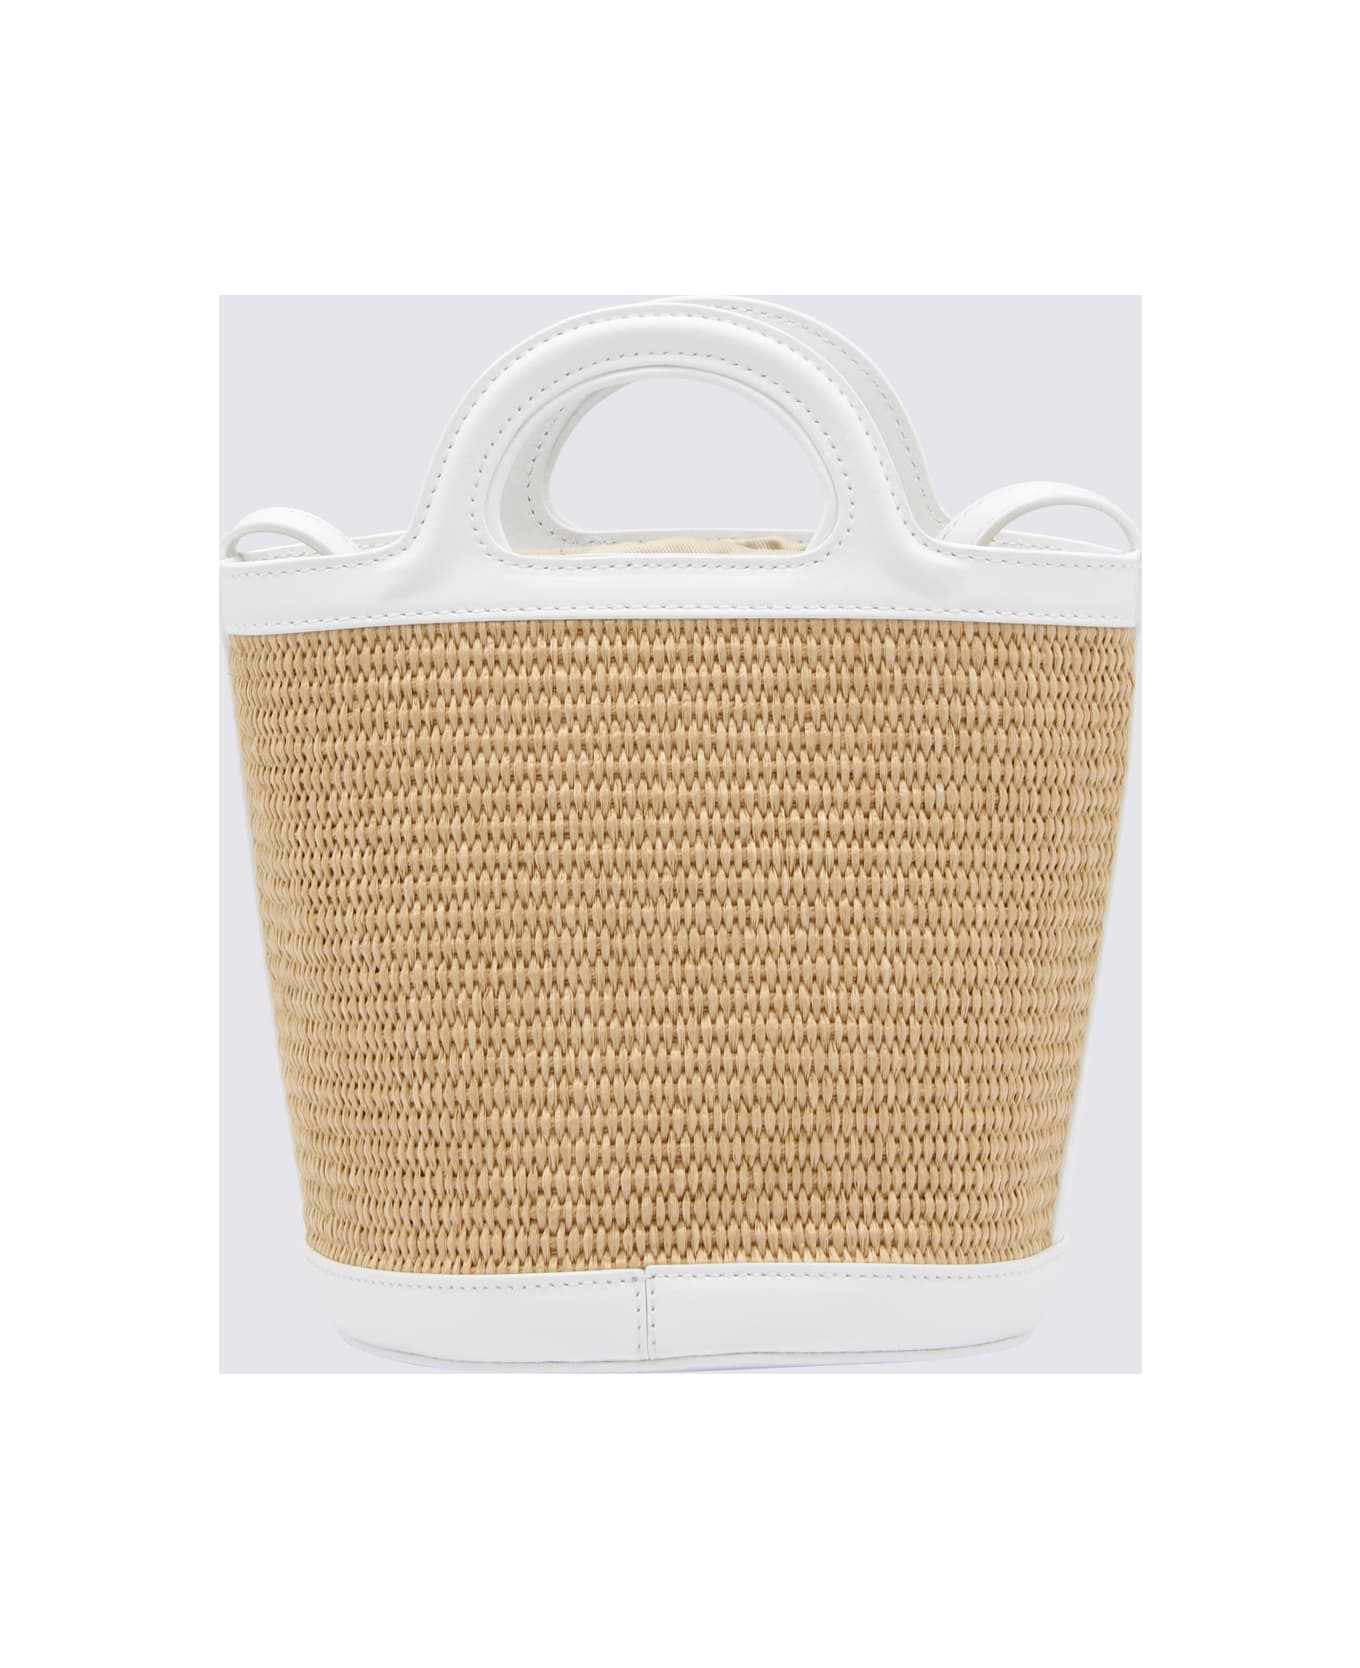 Marni White Leather And Beige Raffia Tropicalia Handle Bag - SAND STORM/LILLY WHITE トートバッグ